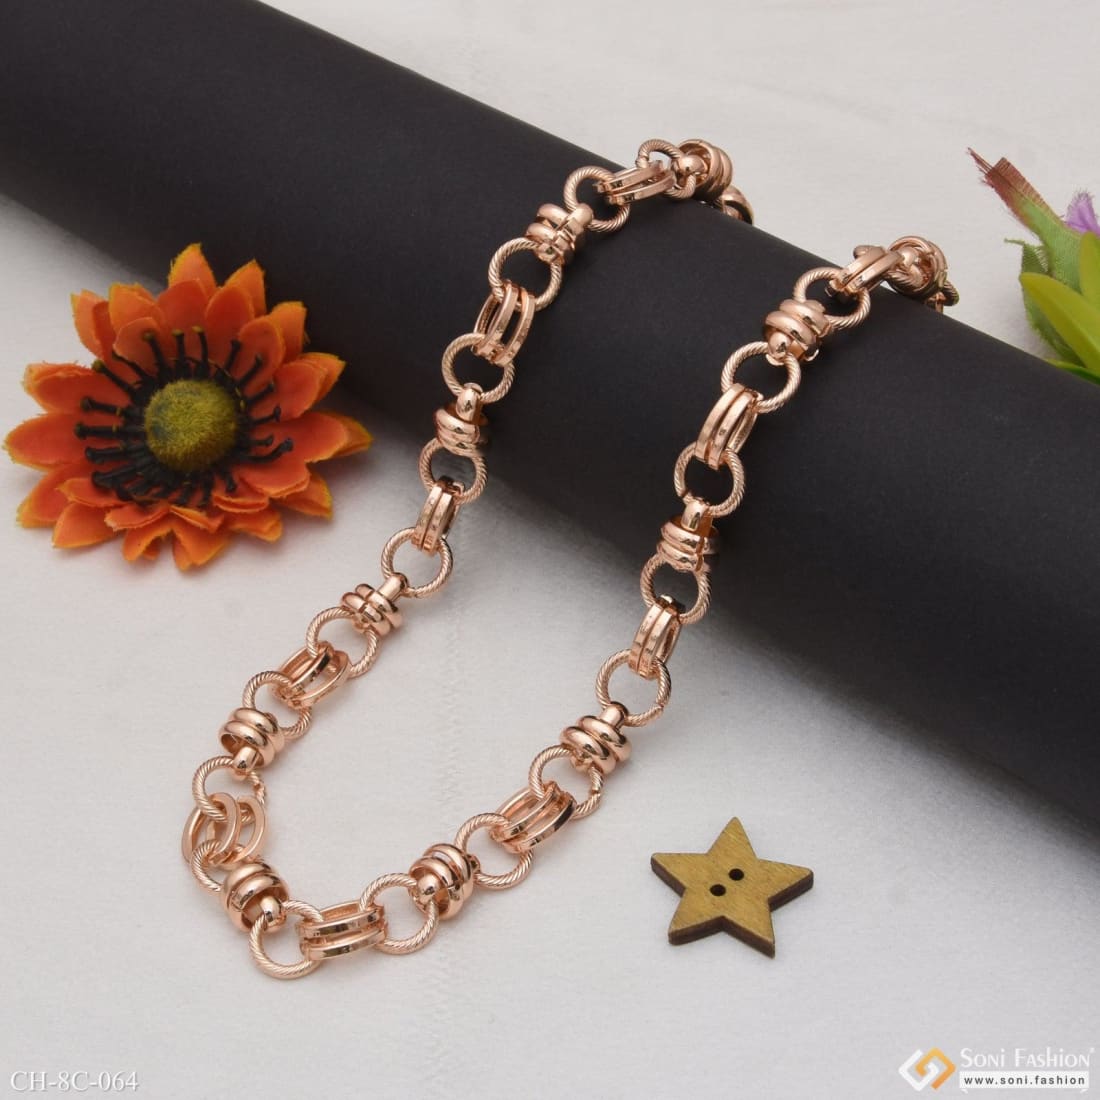 5mm 14K Rose Gold Men's Moon-Cut Ball Chain Necklace 20-30in |  GoldenMine.com